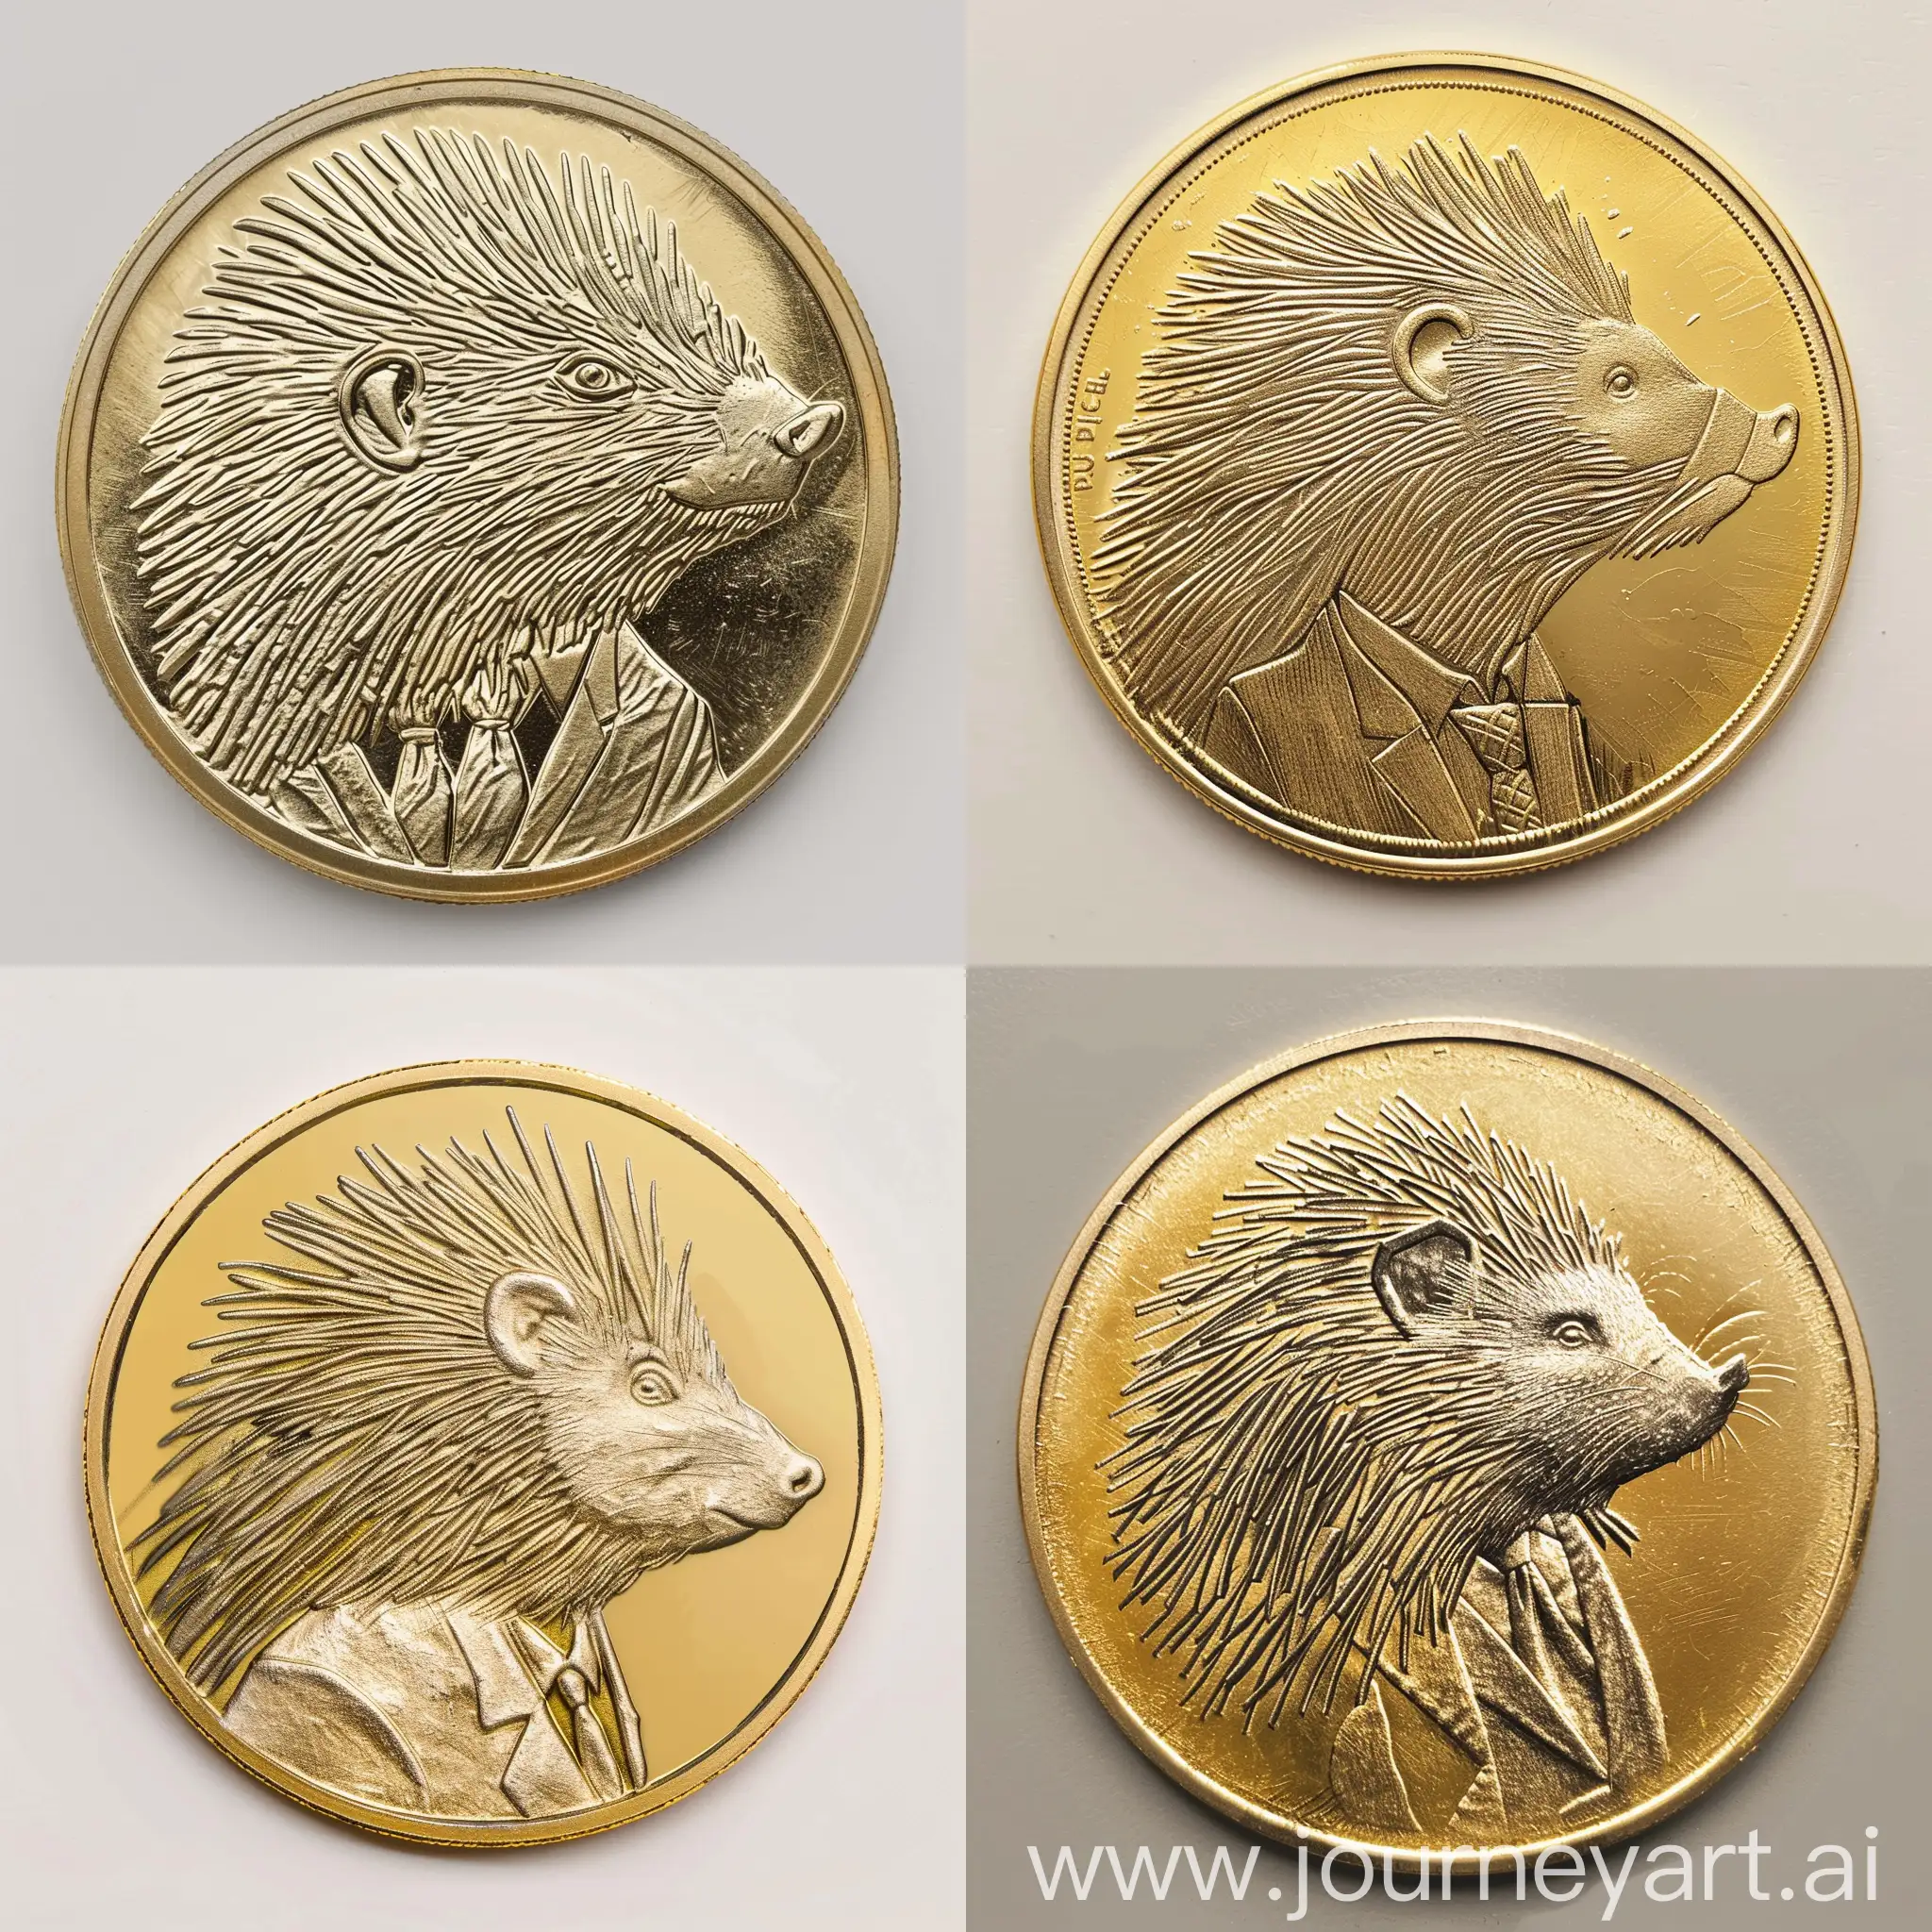 draw a gold coin on a plain background. On the coin, a porcupine is drawn in profile, looking to the right. Porcupine in a presidential suit, with a tie. Minimalism style. except the porcupine there are no other elements